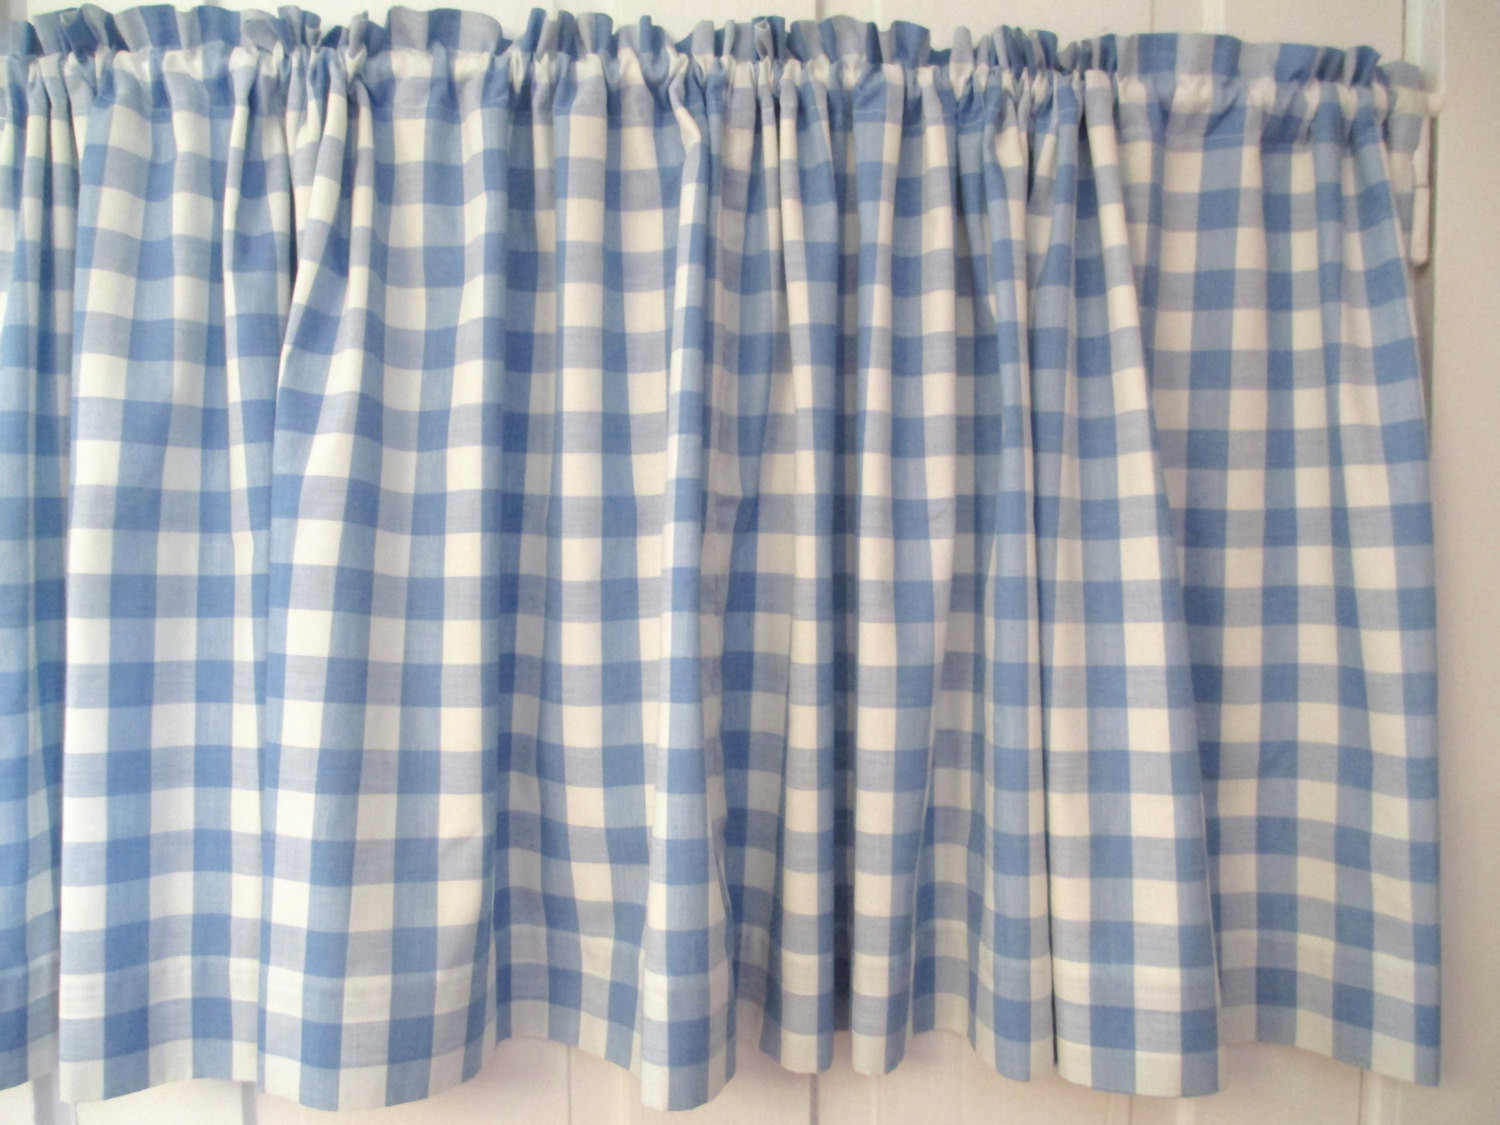 Light Blue Kitchen Curtains
 Vintage Blue White Gingham Cafe Curtain Cotton by AStringorTwo